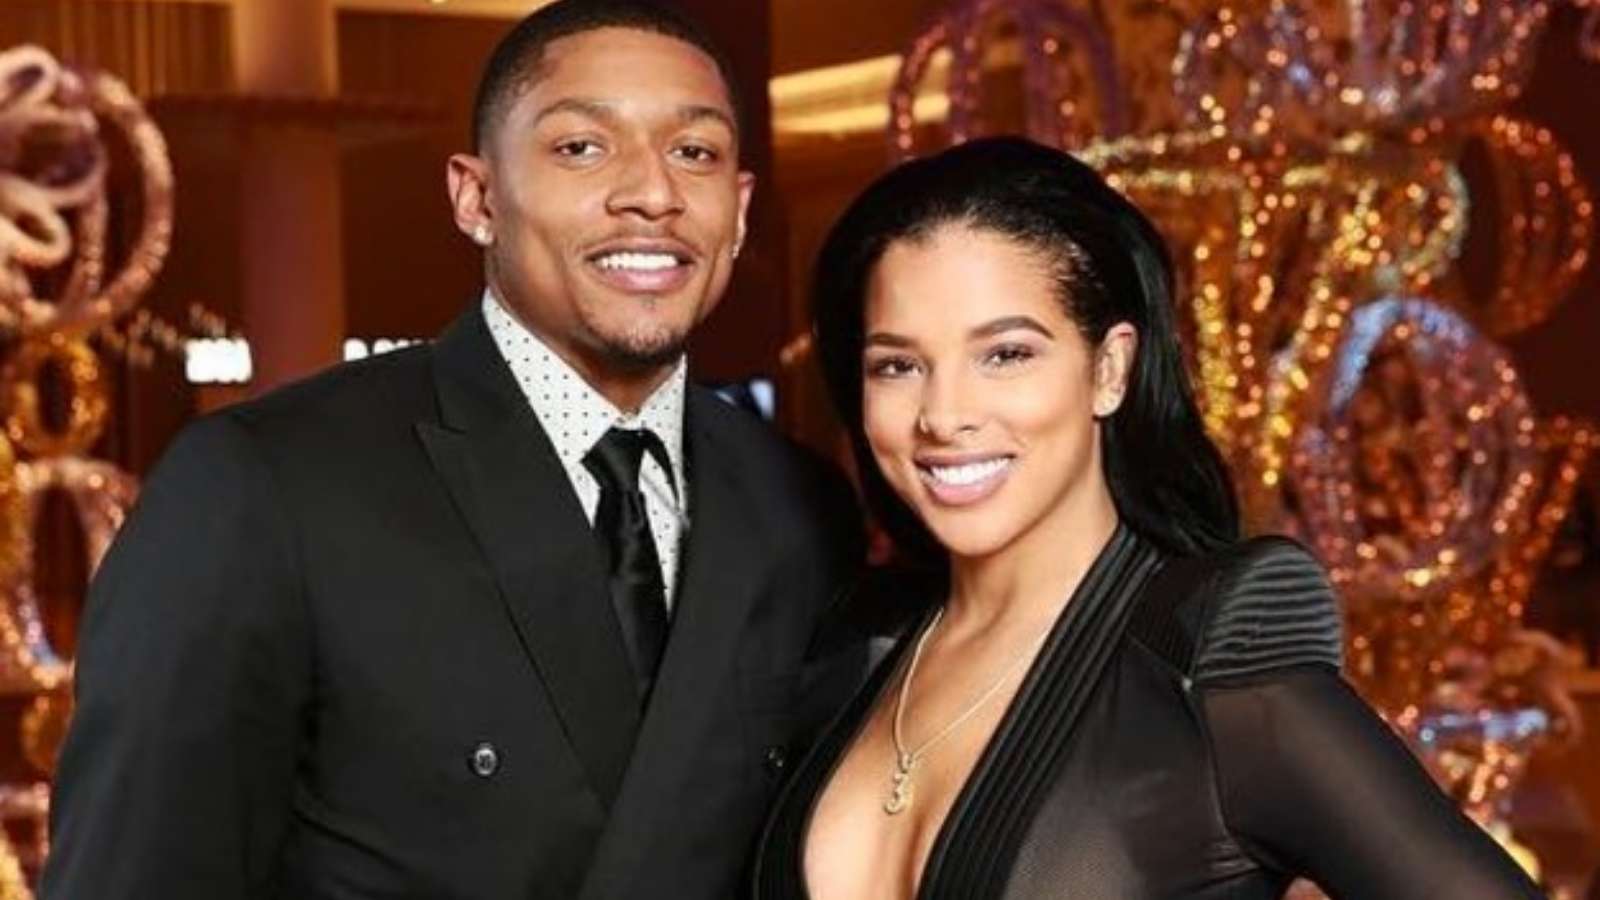 Inside Look Top 5 NBA Players' Wives and Girlfriends Dominating Instagram Scene